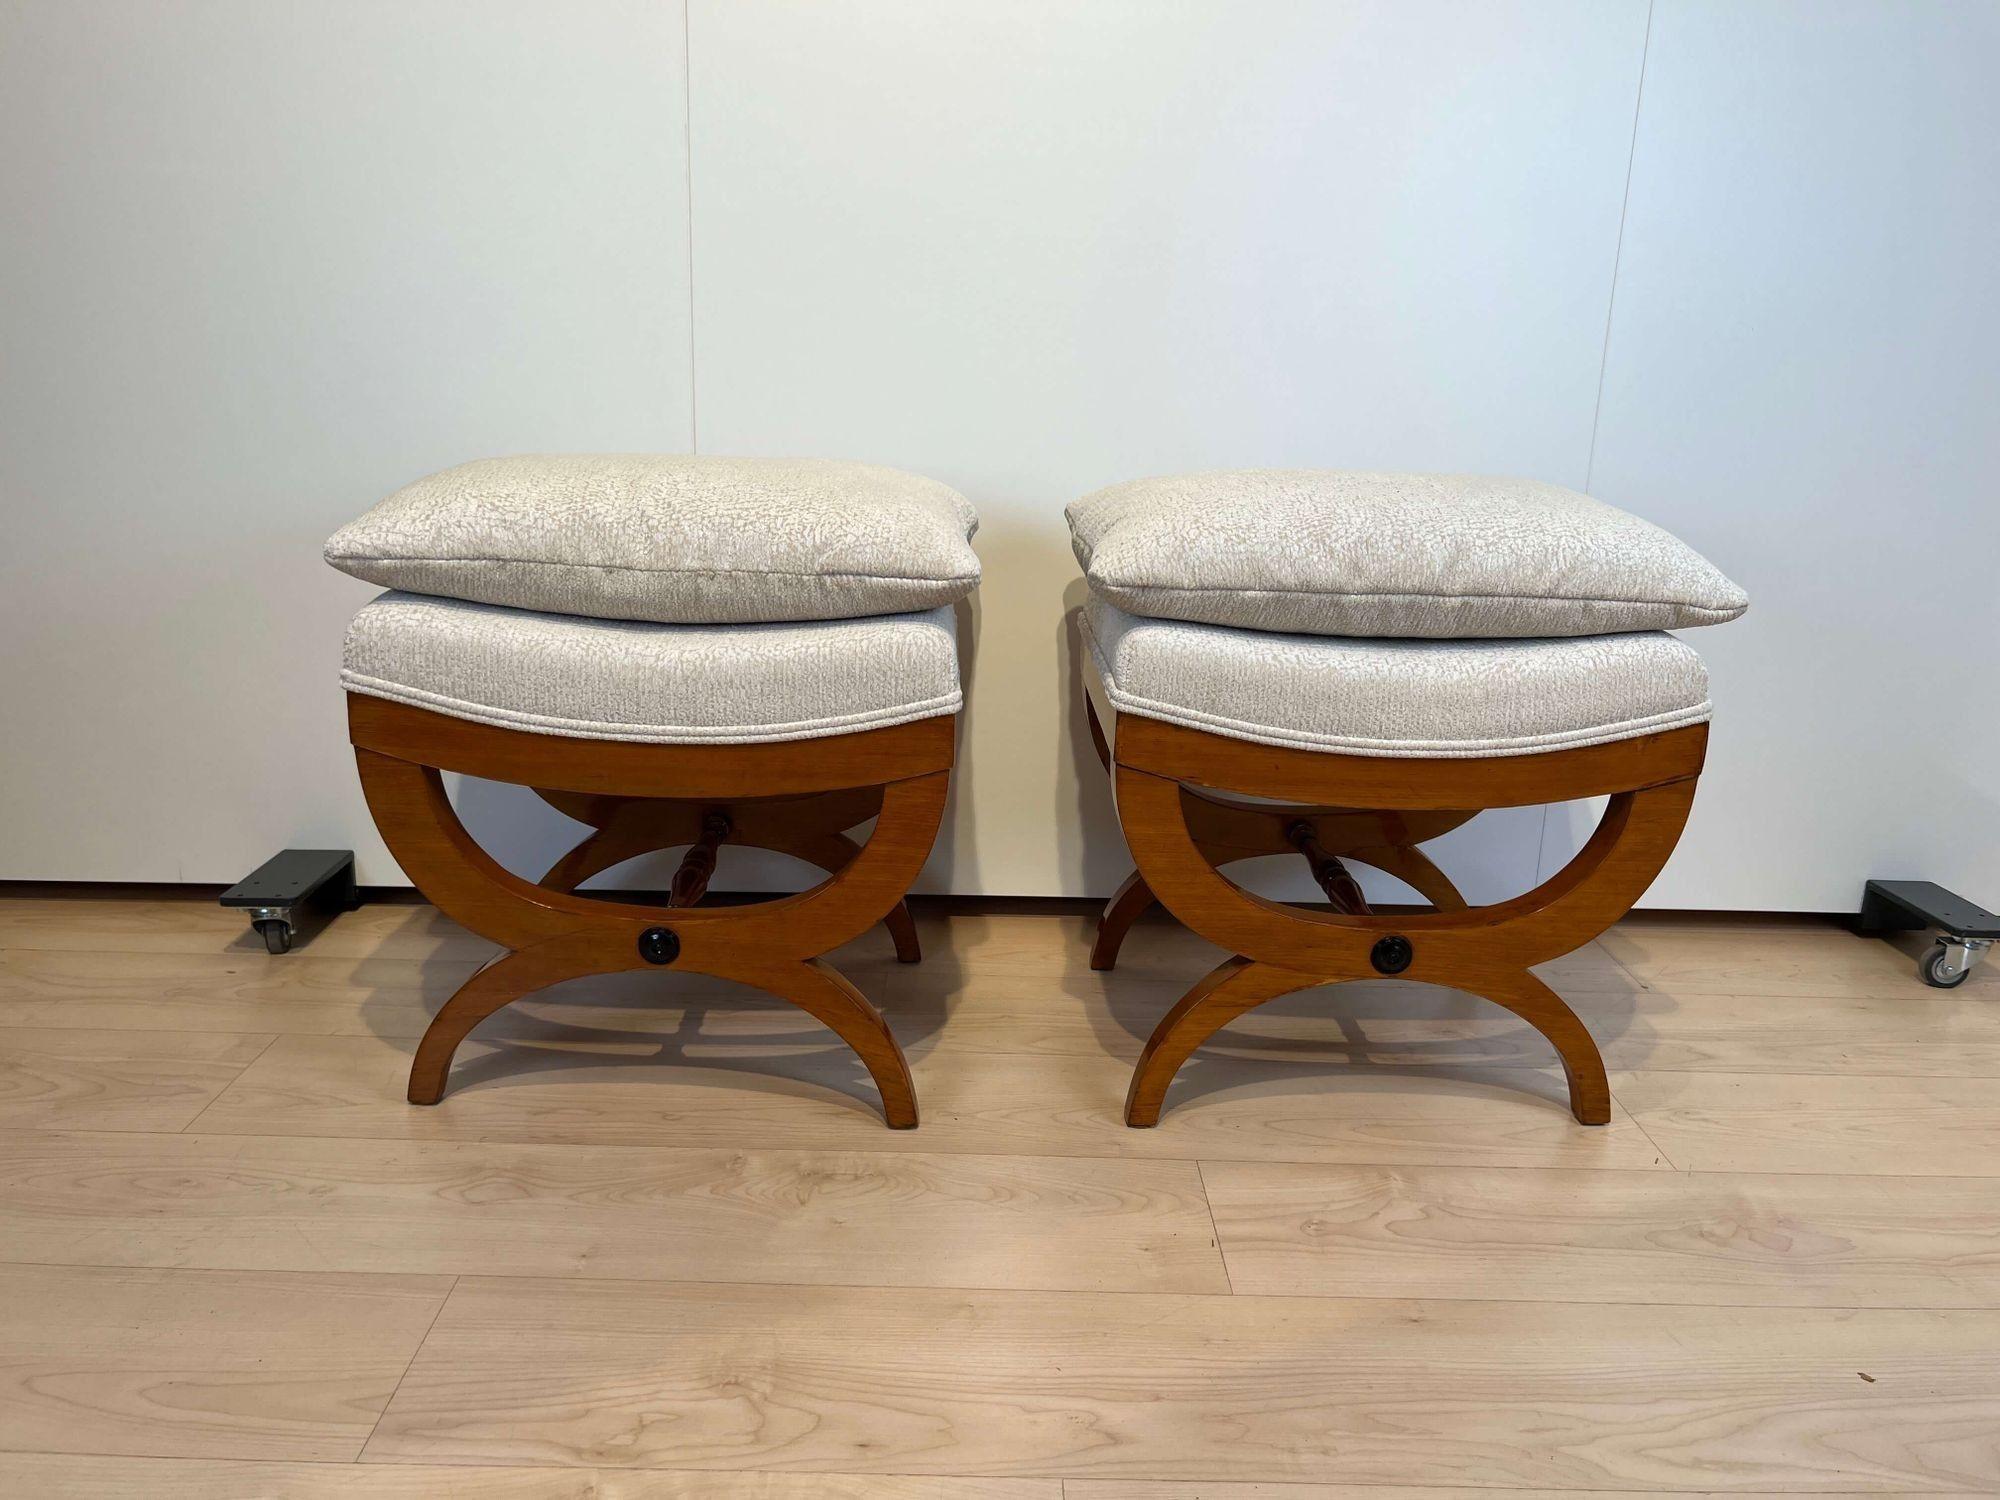 Beautiful pair of large french stools or tabouret from the mid 19th century.
Solid beech, partly ebonized. Restored and hand polished with shellac.
Newly upholstered and covered with cream and white mottled fabric and double keder.
Each stool comes